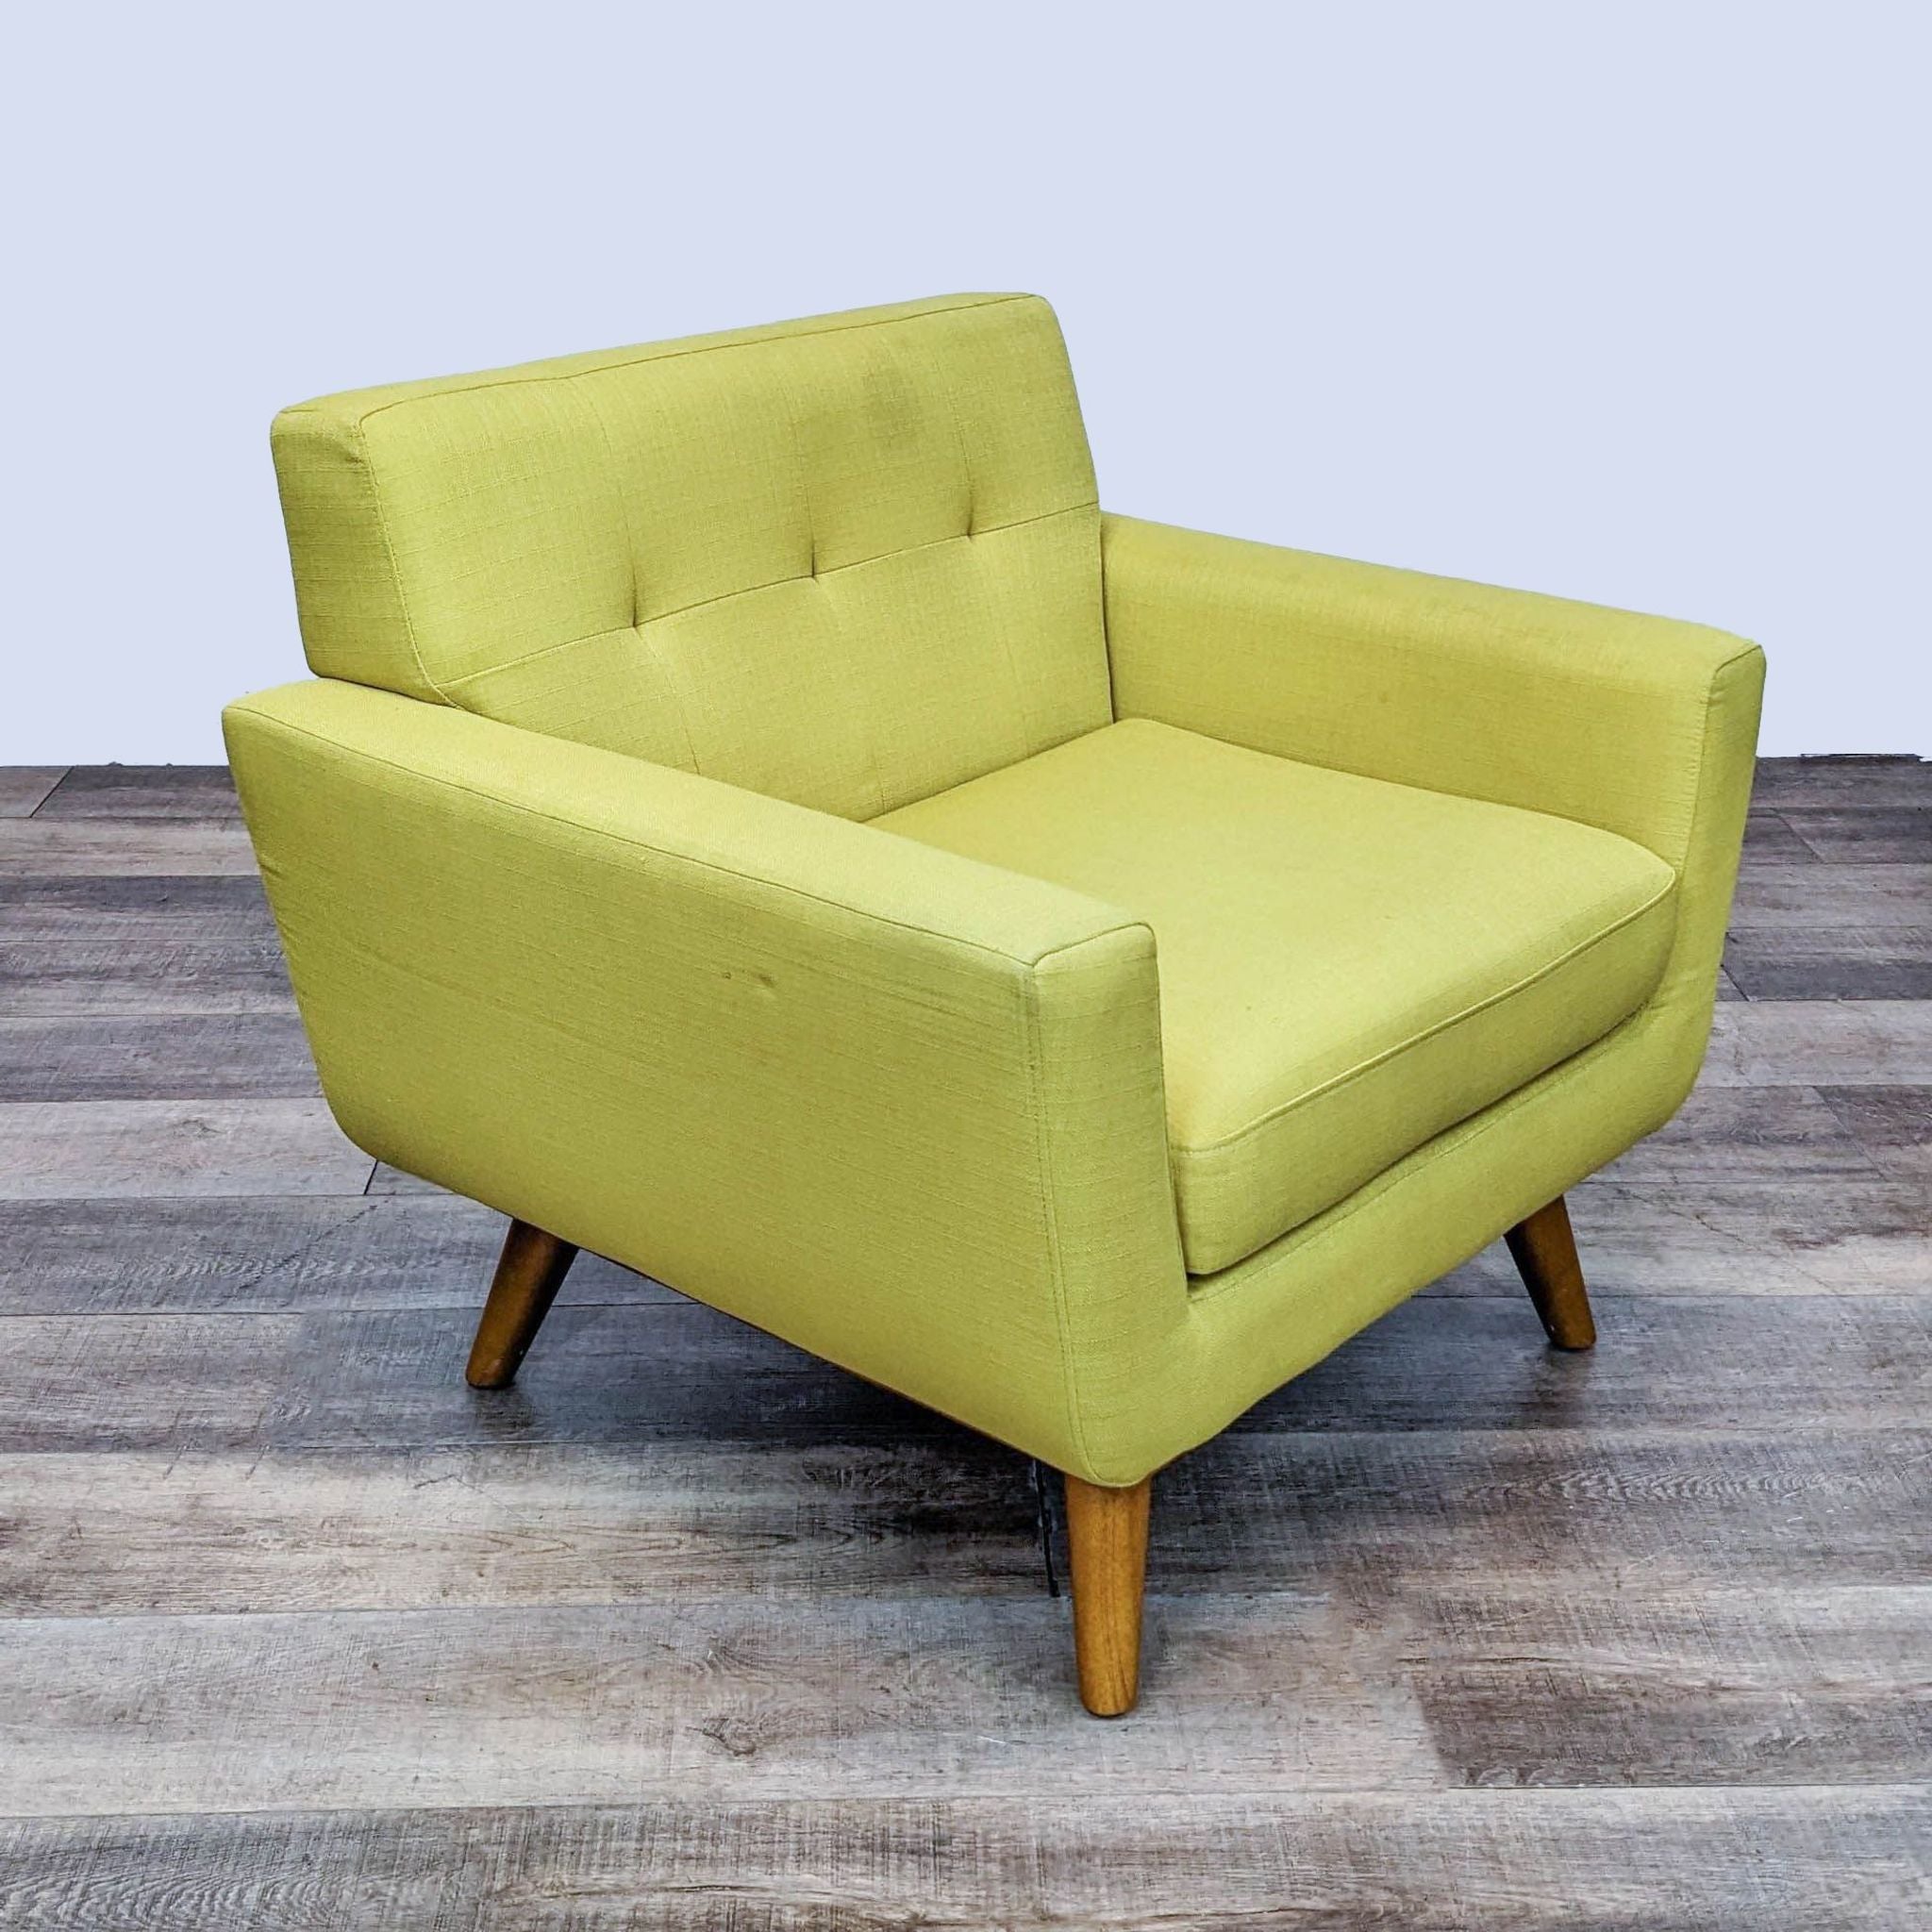 "Modway Engage chair with button tufting, mid-century modern design, in lime green, with tapered wood legs on a wooden floor."